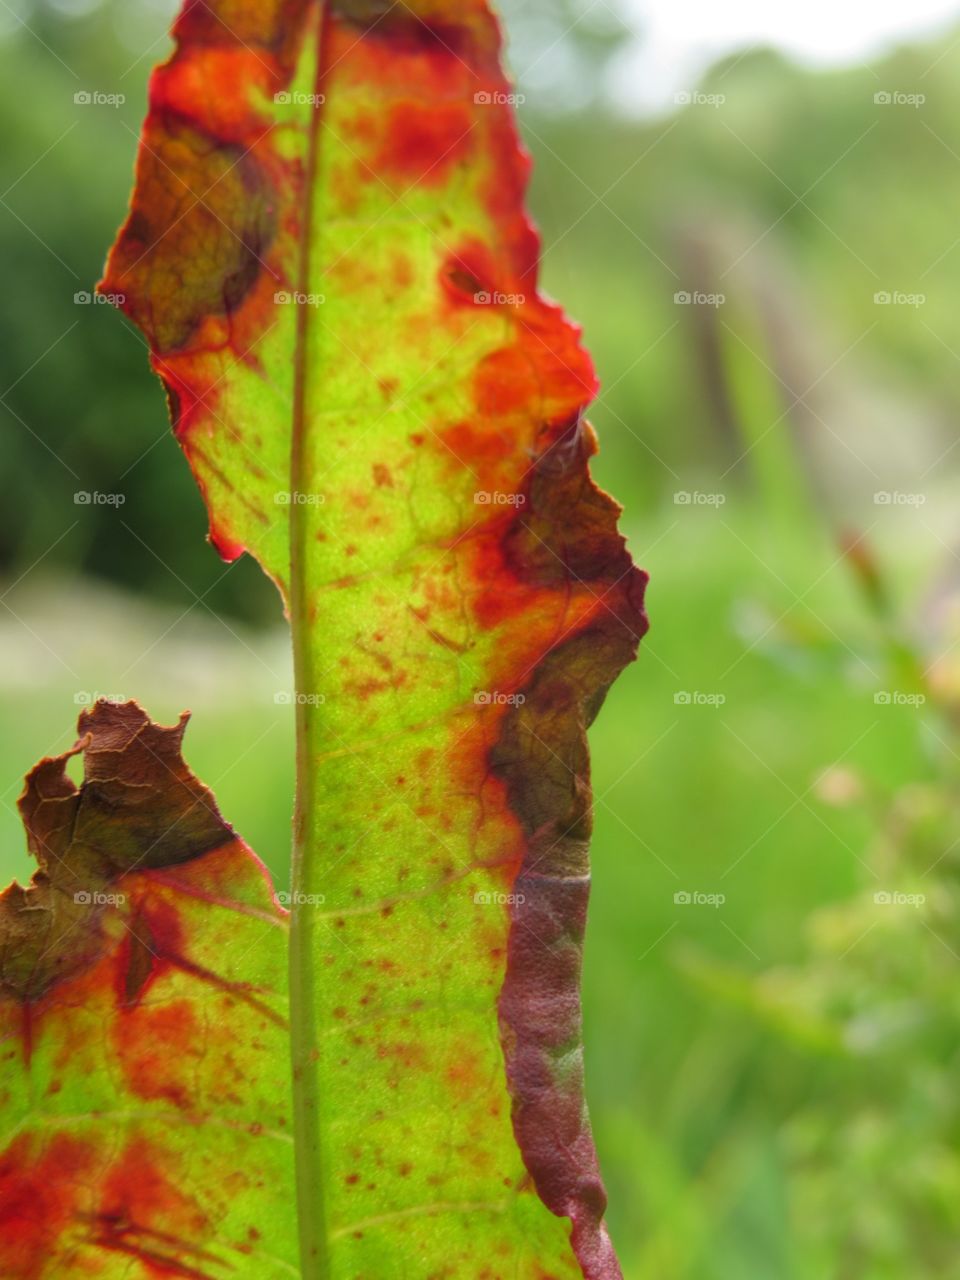 A green leaf turning red